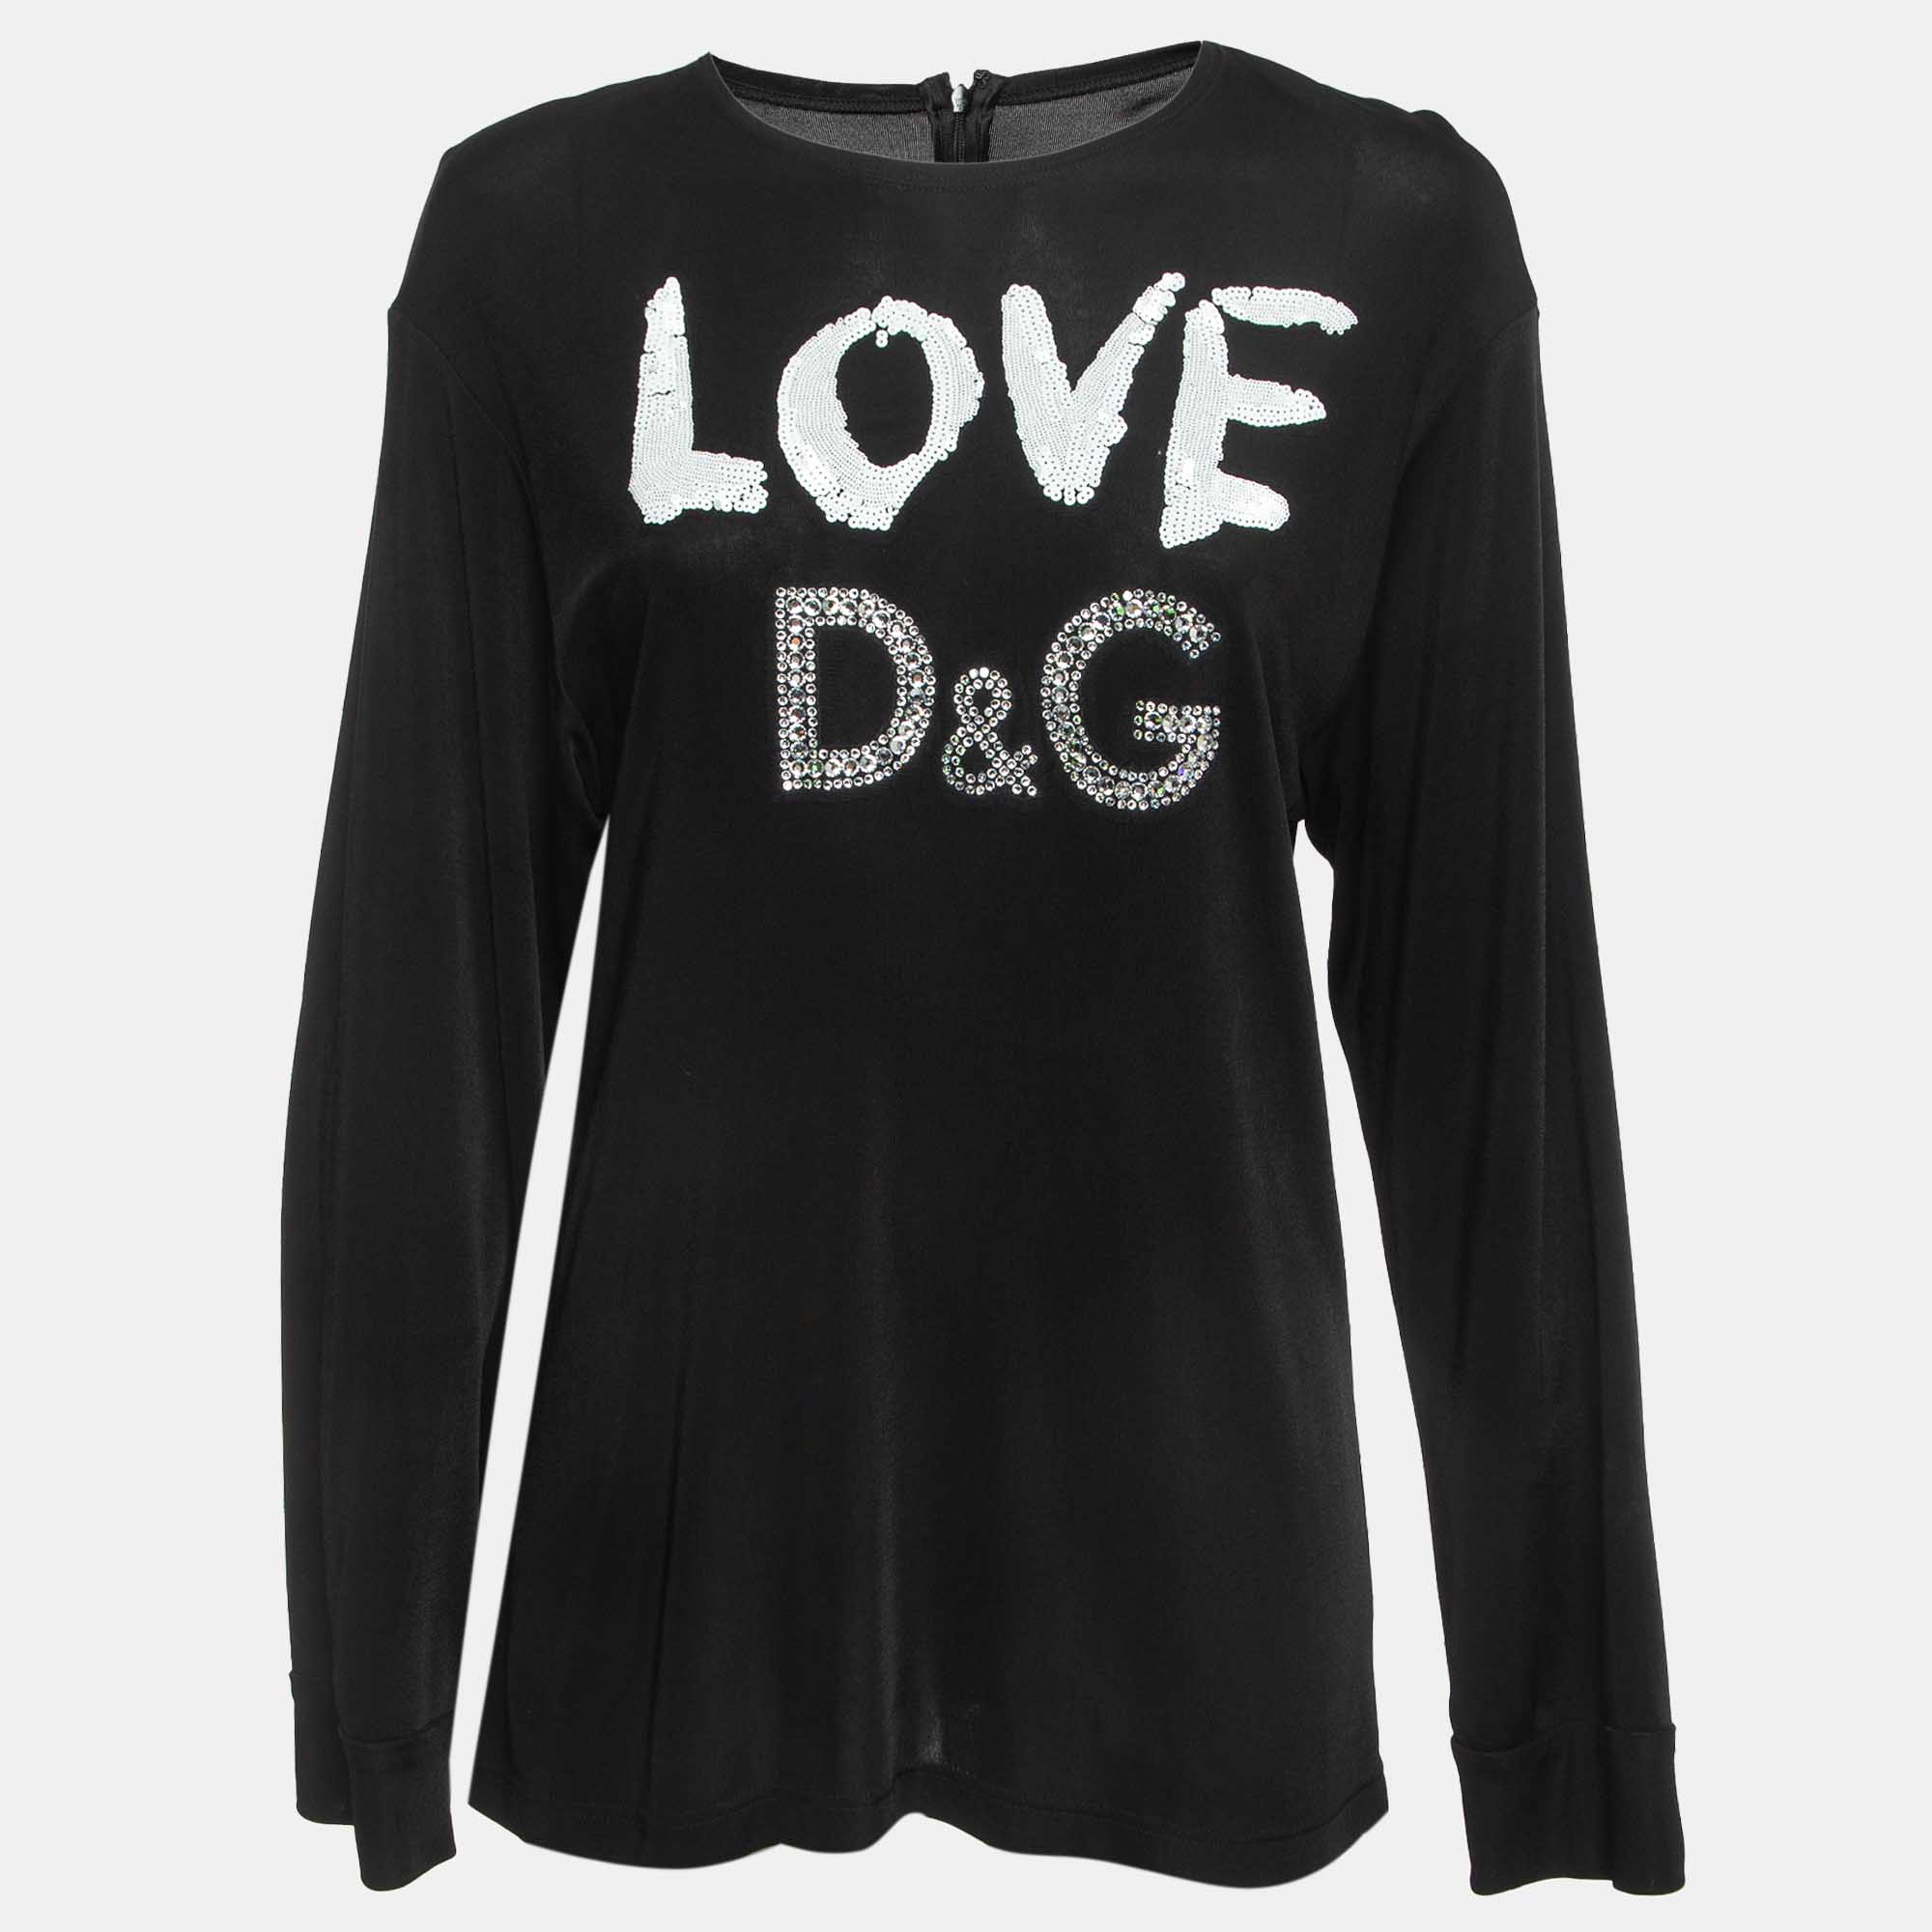 Dolce & Gabbana Black Jersey Sequined Top S